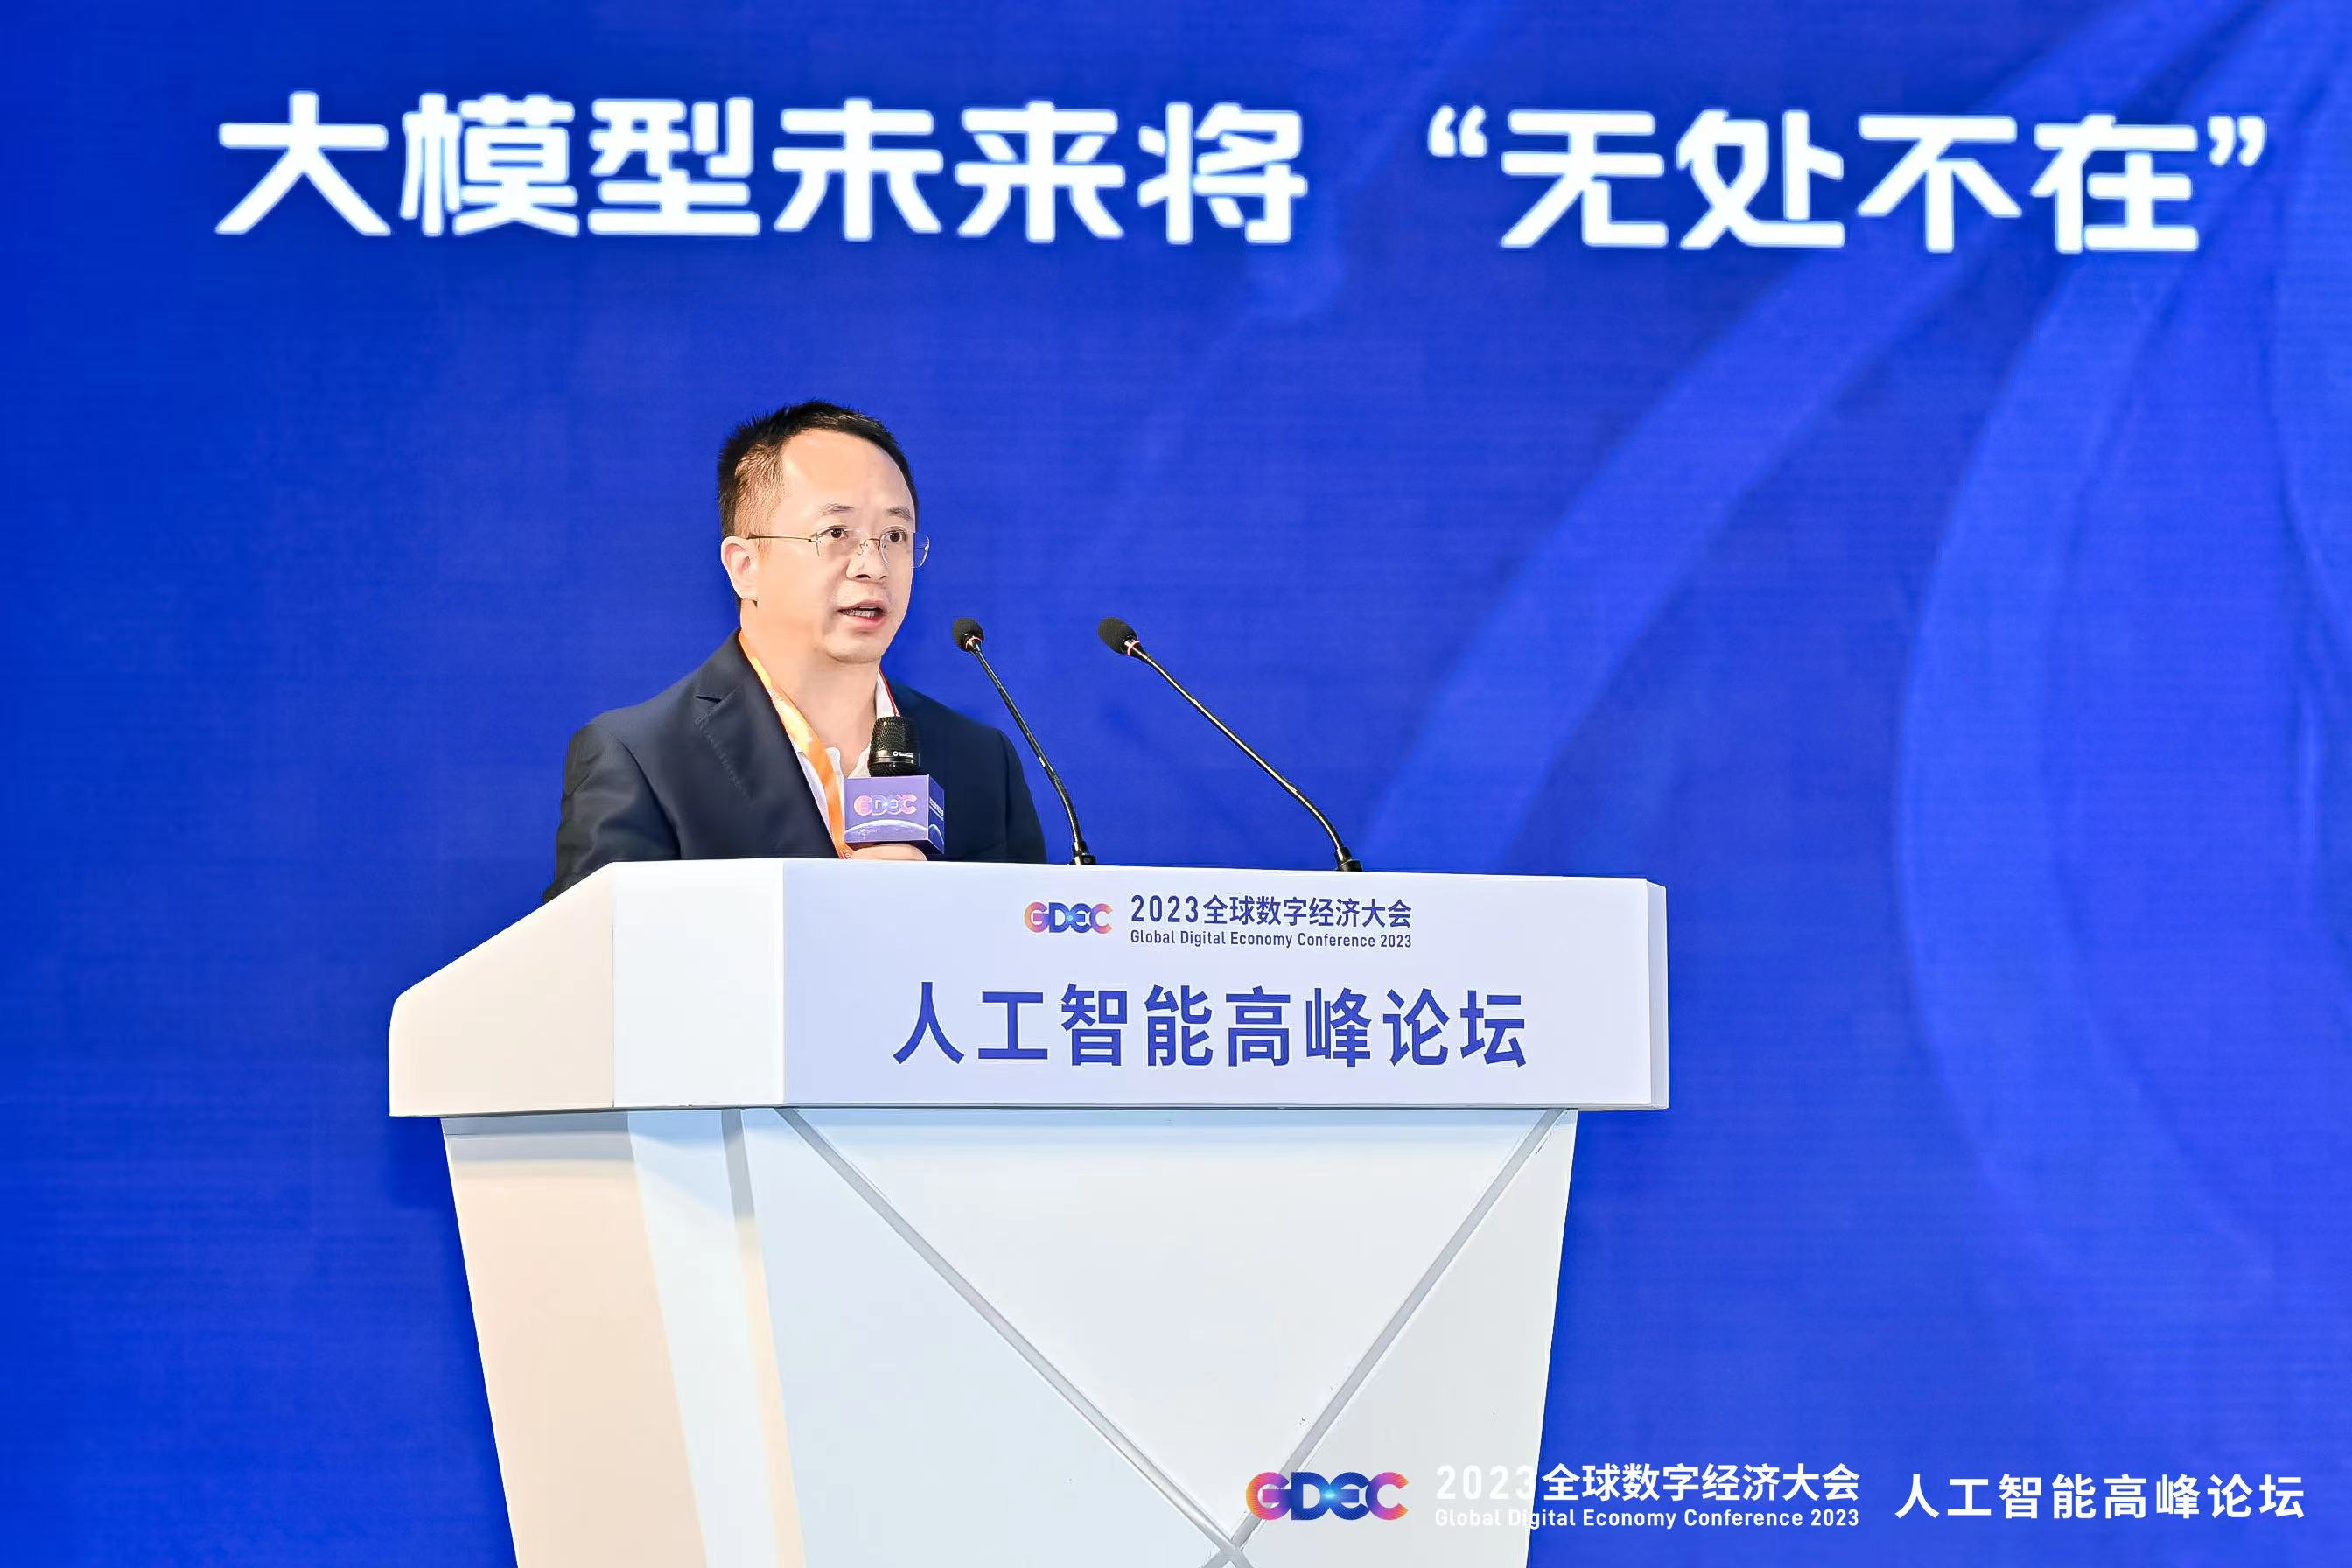 Founder of Chinese internet security company 360 sees real opportunity for large language models in 